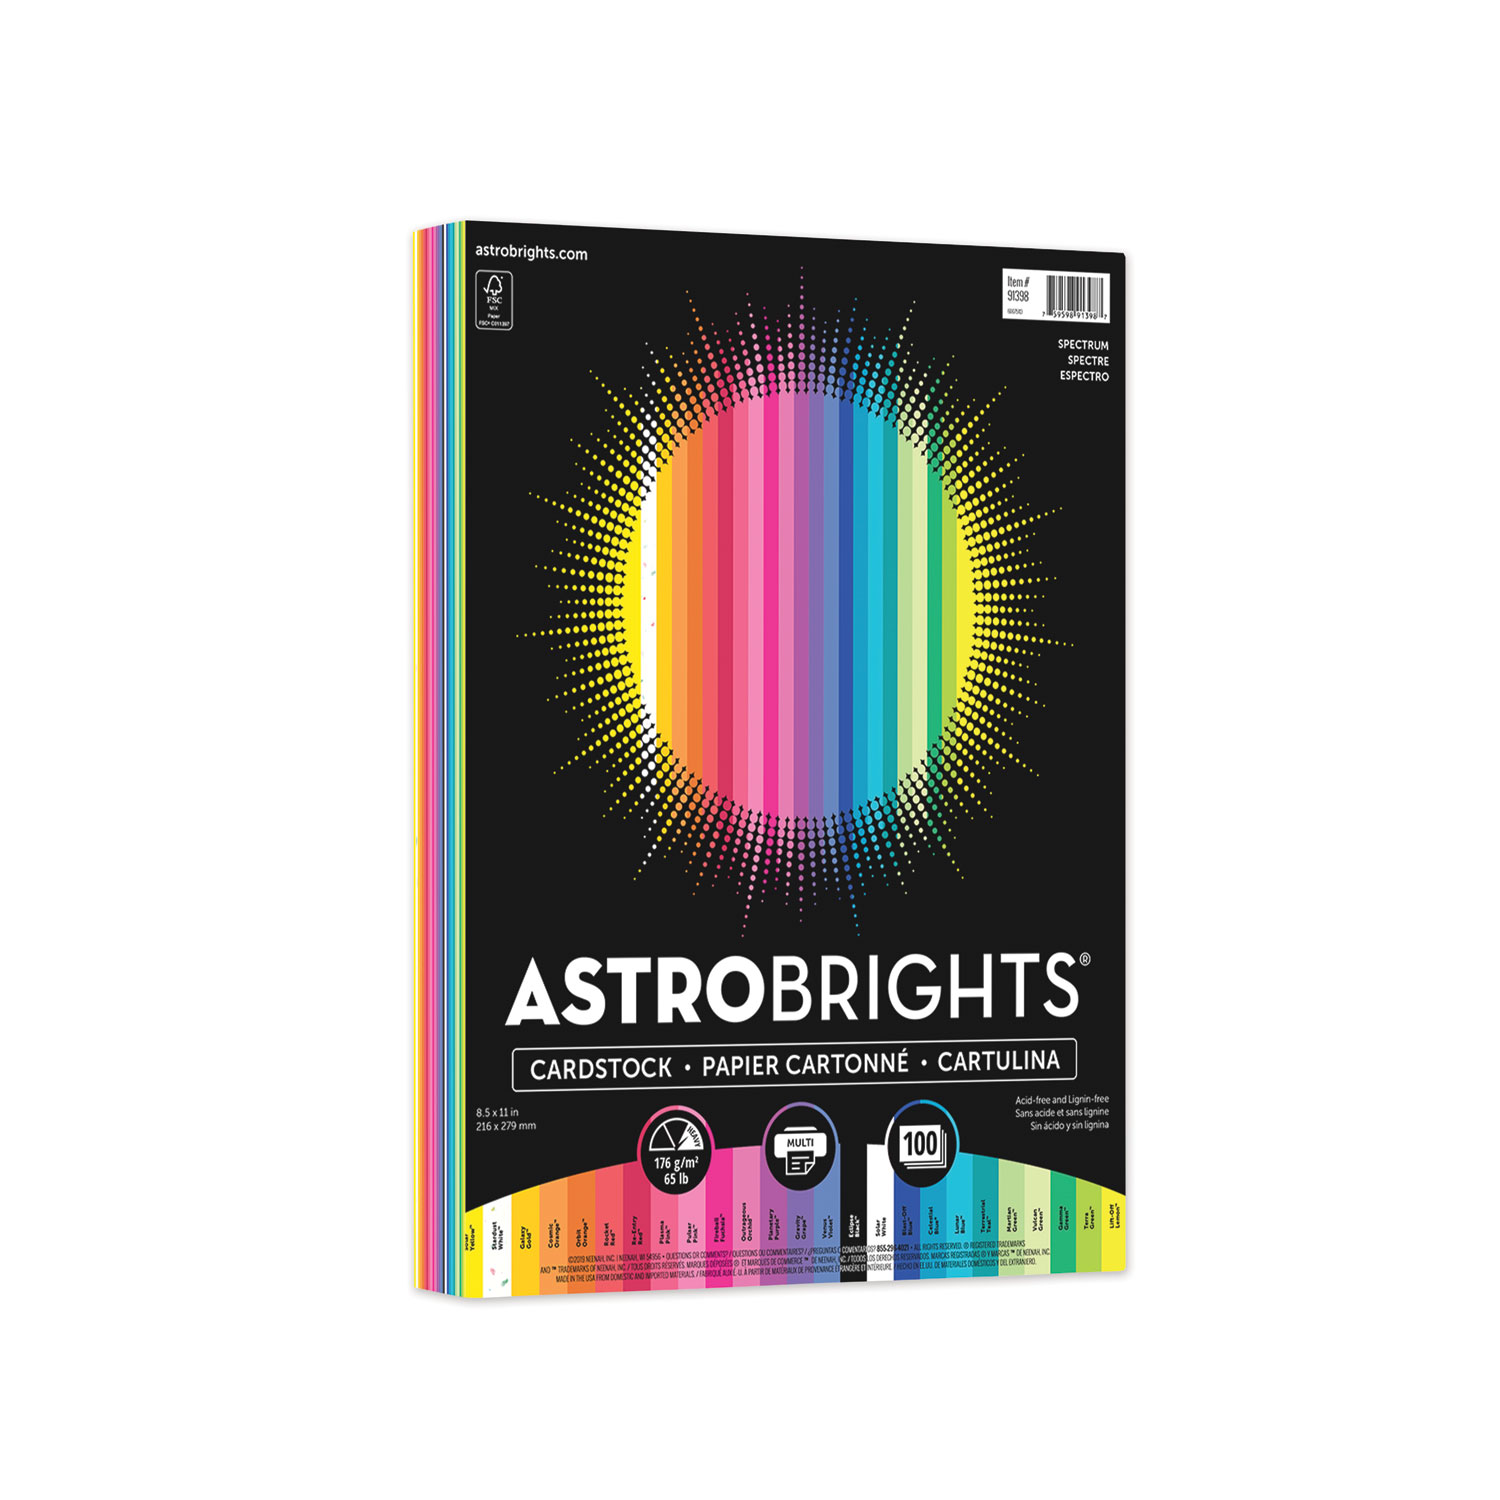 Astrobrights® Color Cardstock, 65 lb, 8.5 x 11, Assorted Colors, 100/Pack